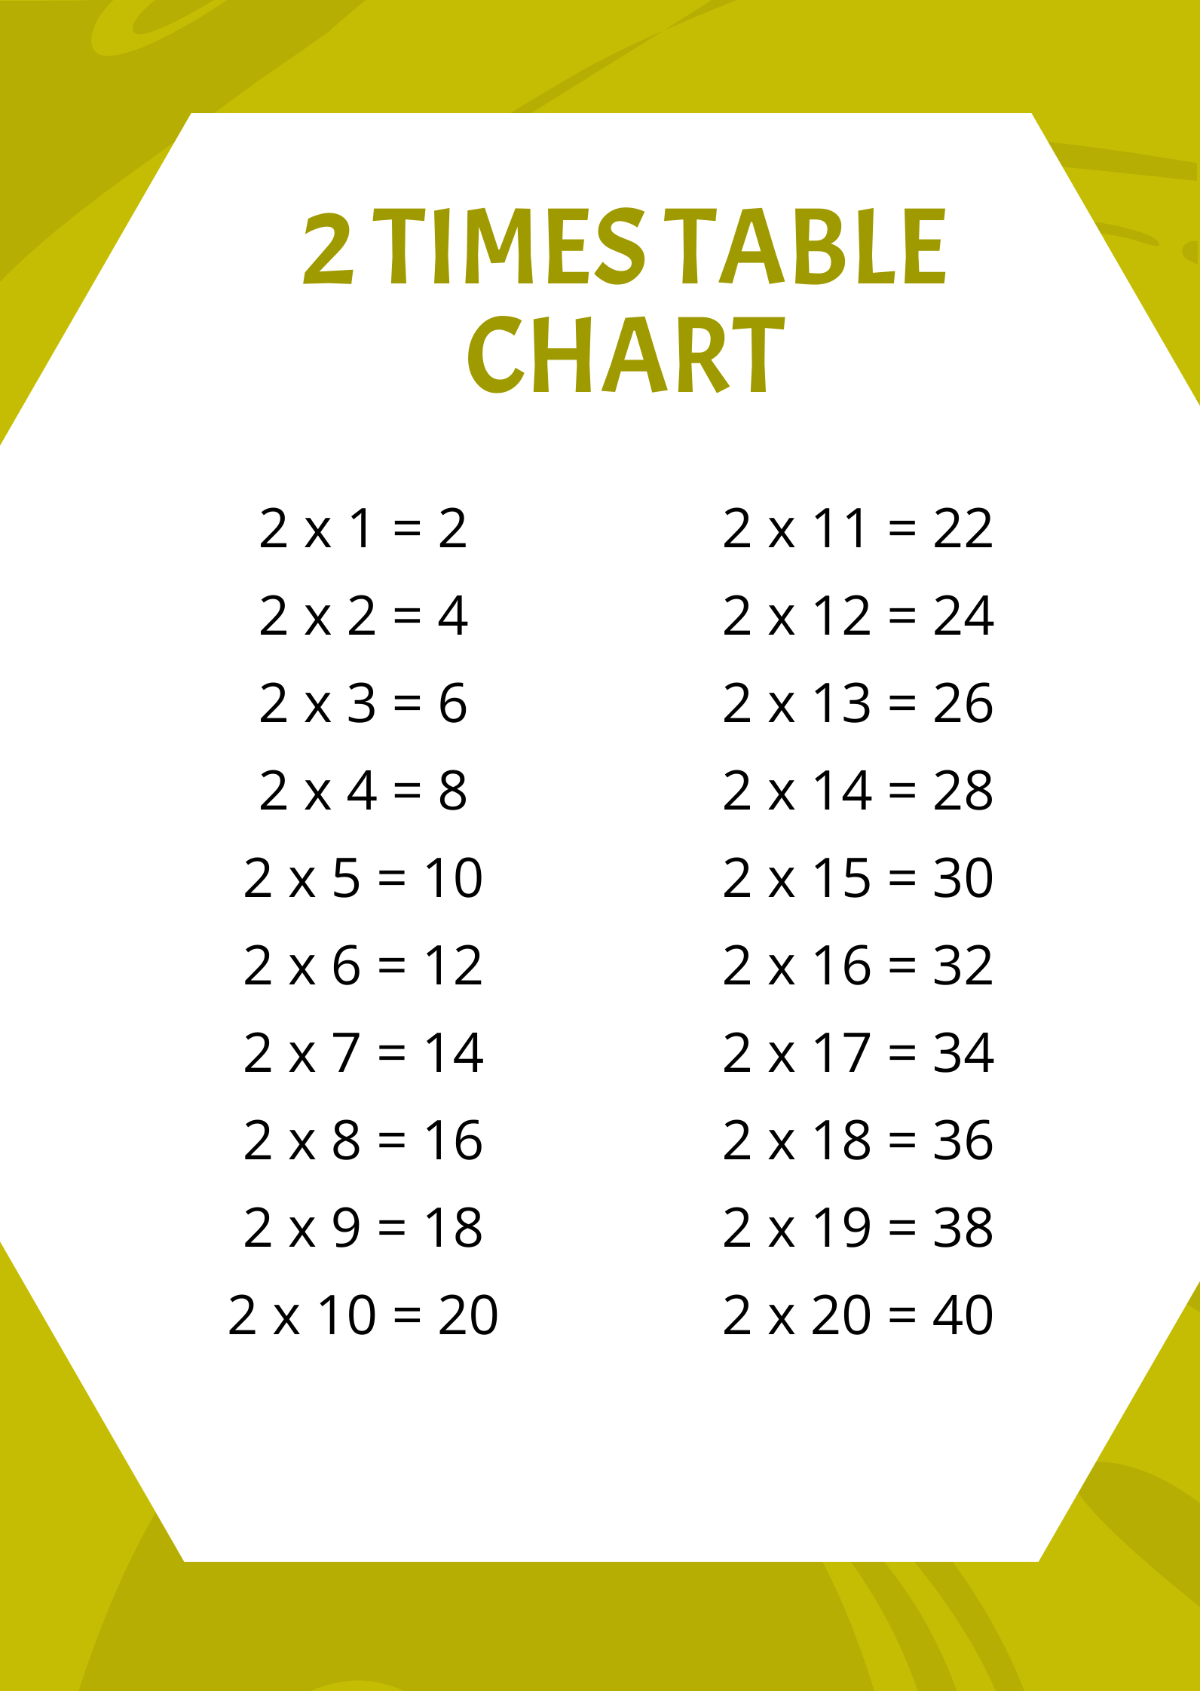 2 Times Table Chart Template